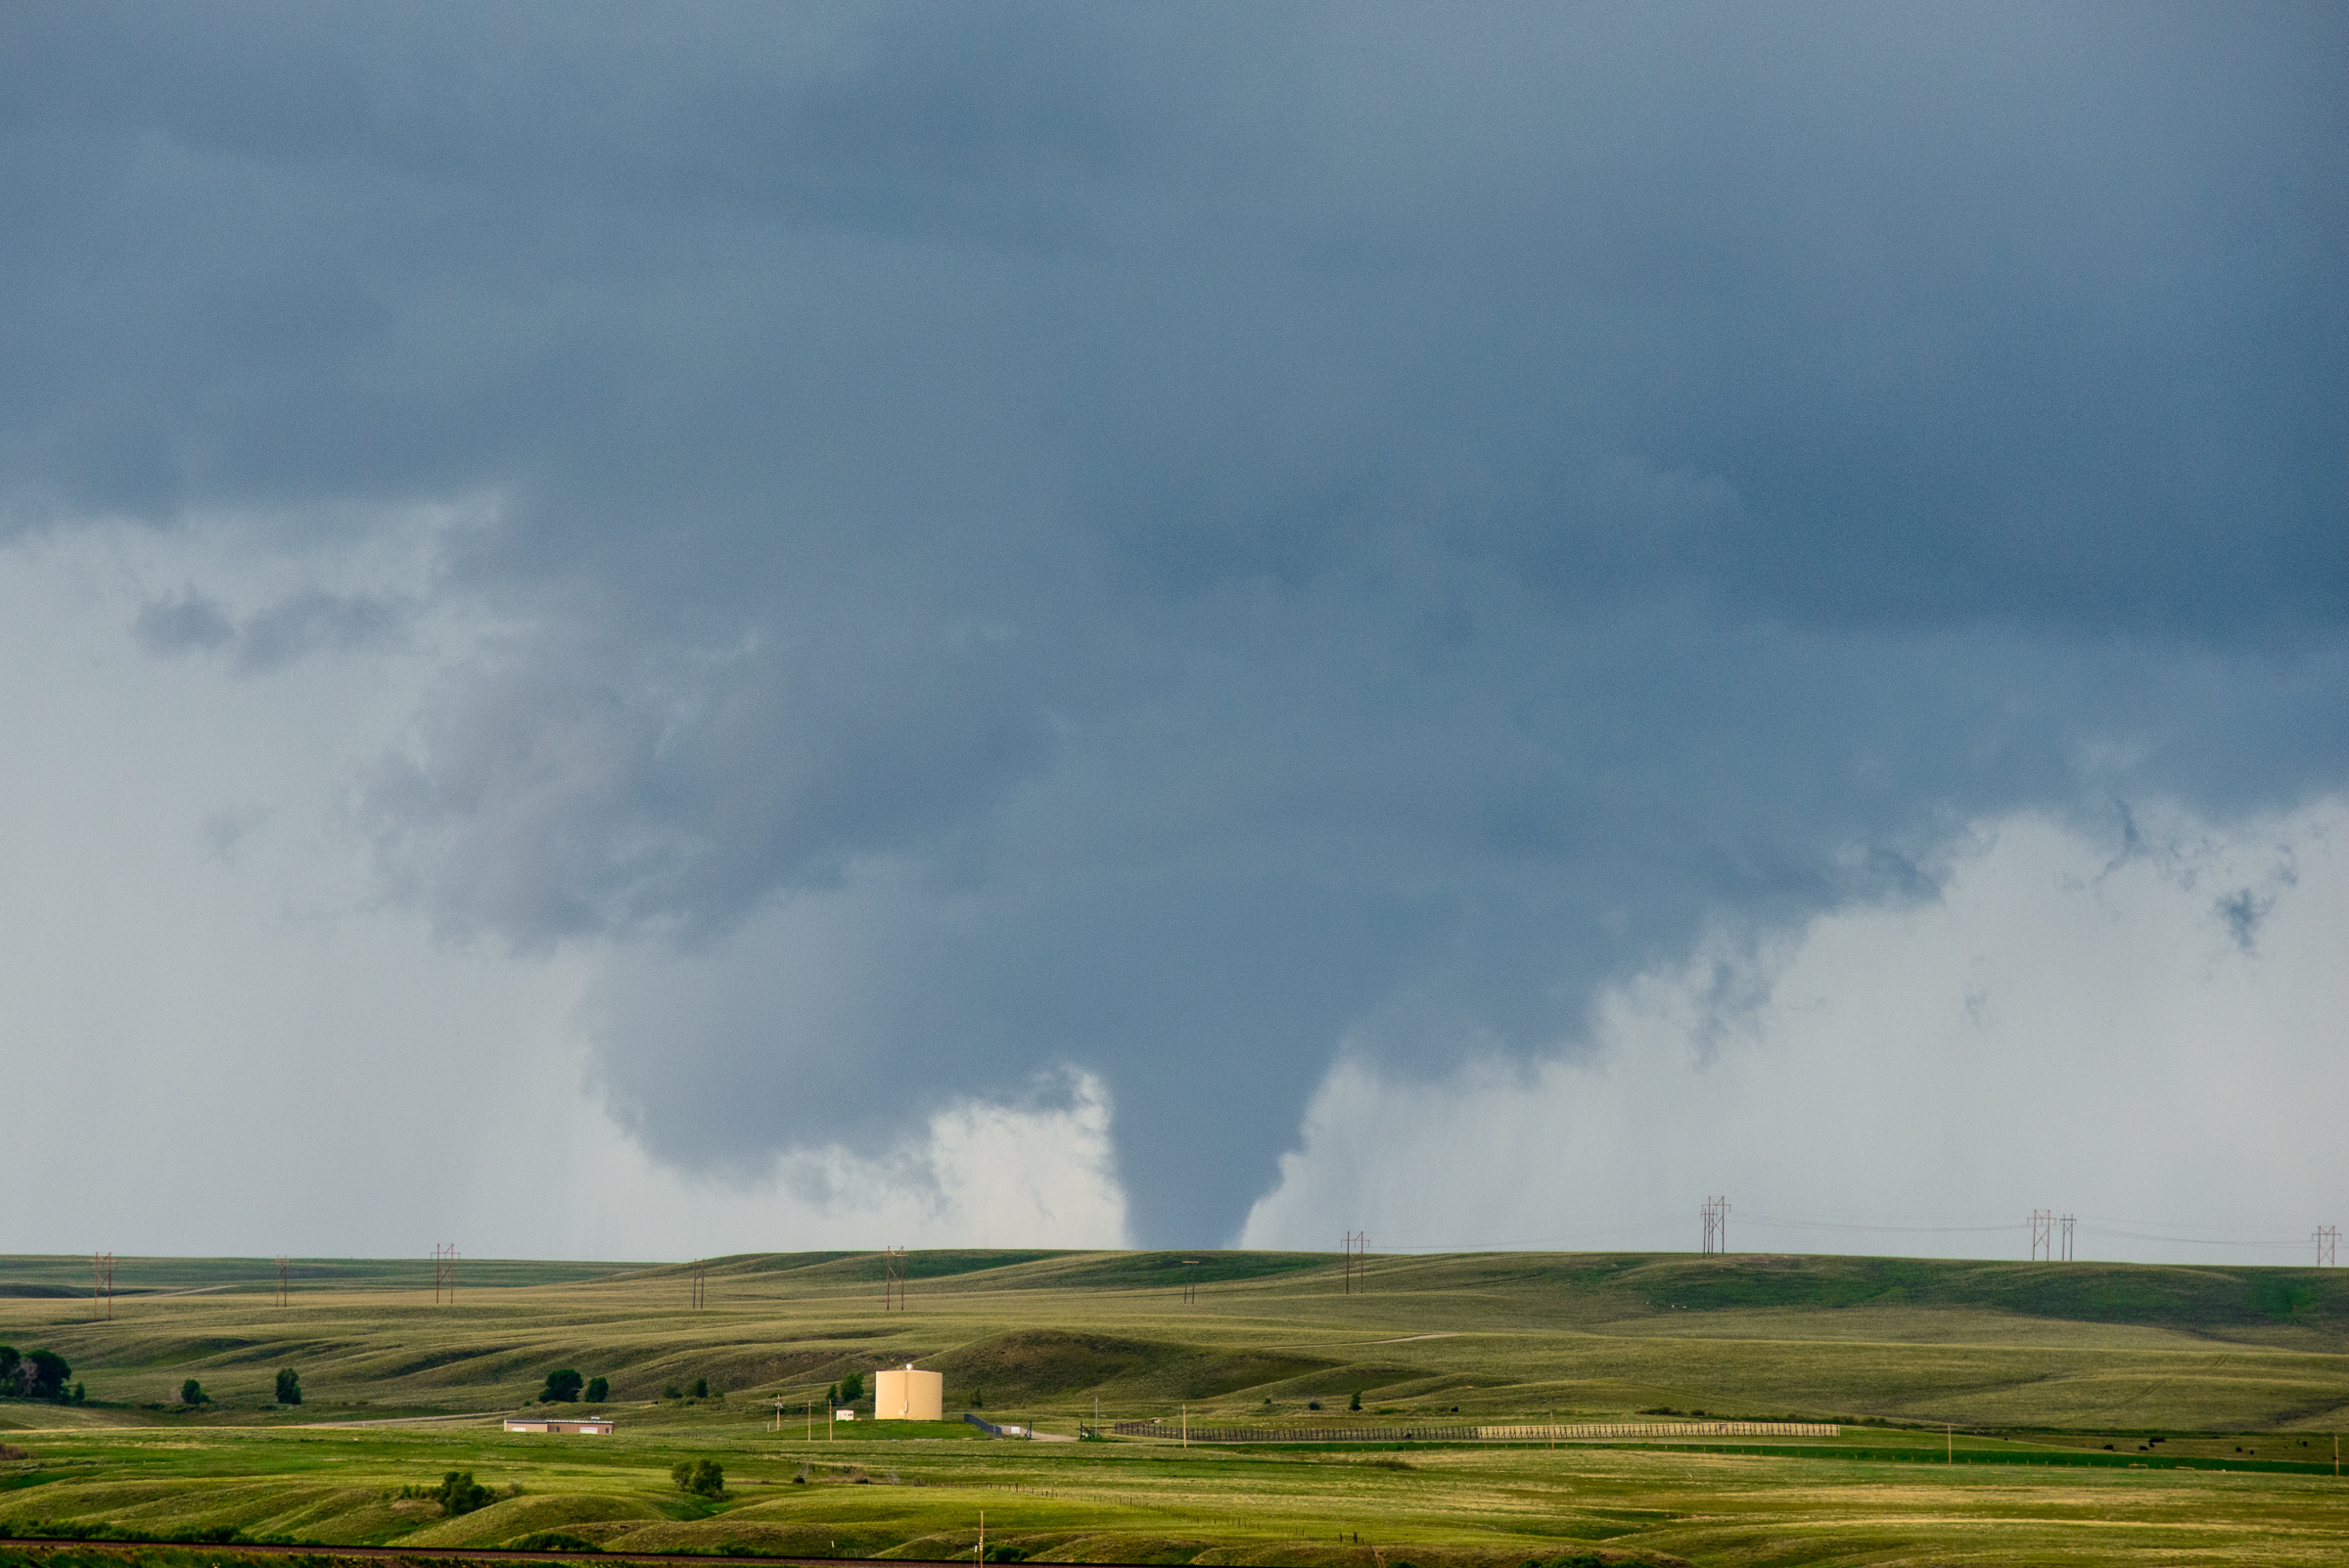 Extreme Tornado Outbreaks Are Happening More Often Across The US